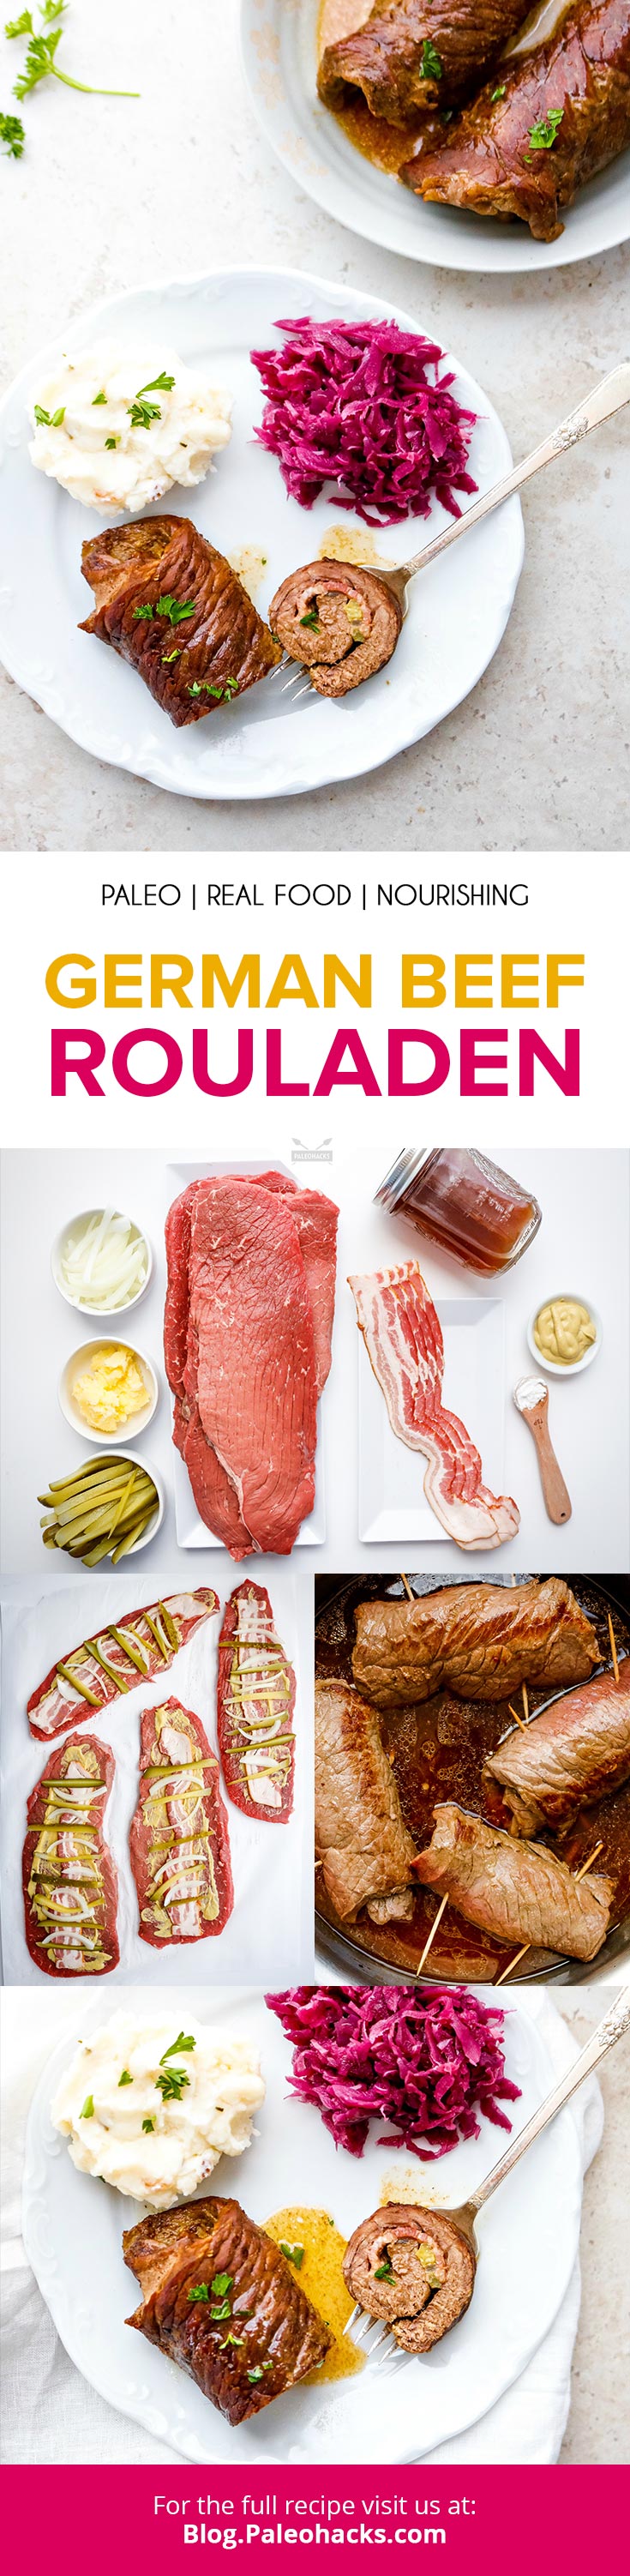 Classic German rouladen takes thin slices of beef and fills them with mustard, bacon, pickles, and onions. It’s made in one pan and makes cleanup a cinch!